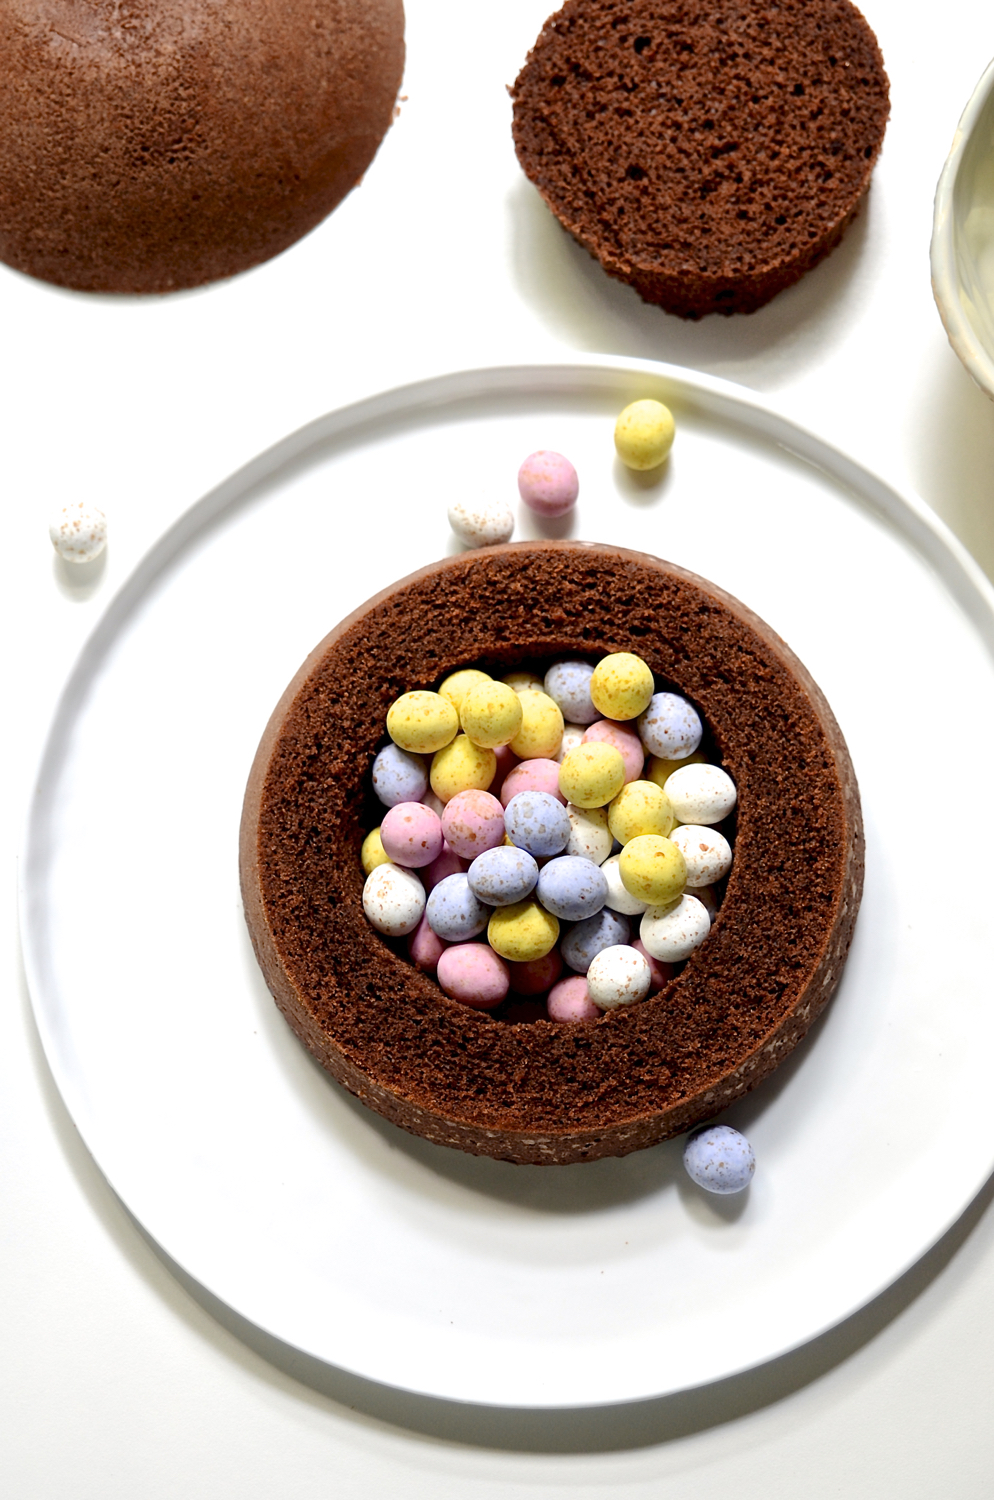 Chocolate Easter egg surprise cake